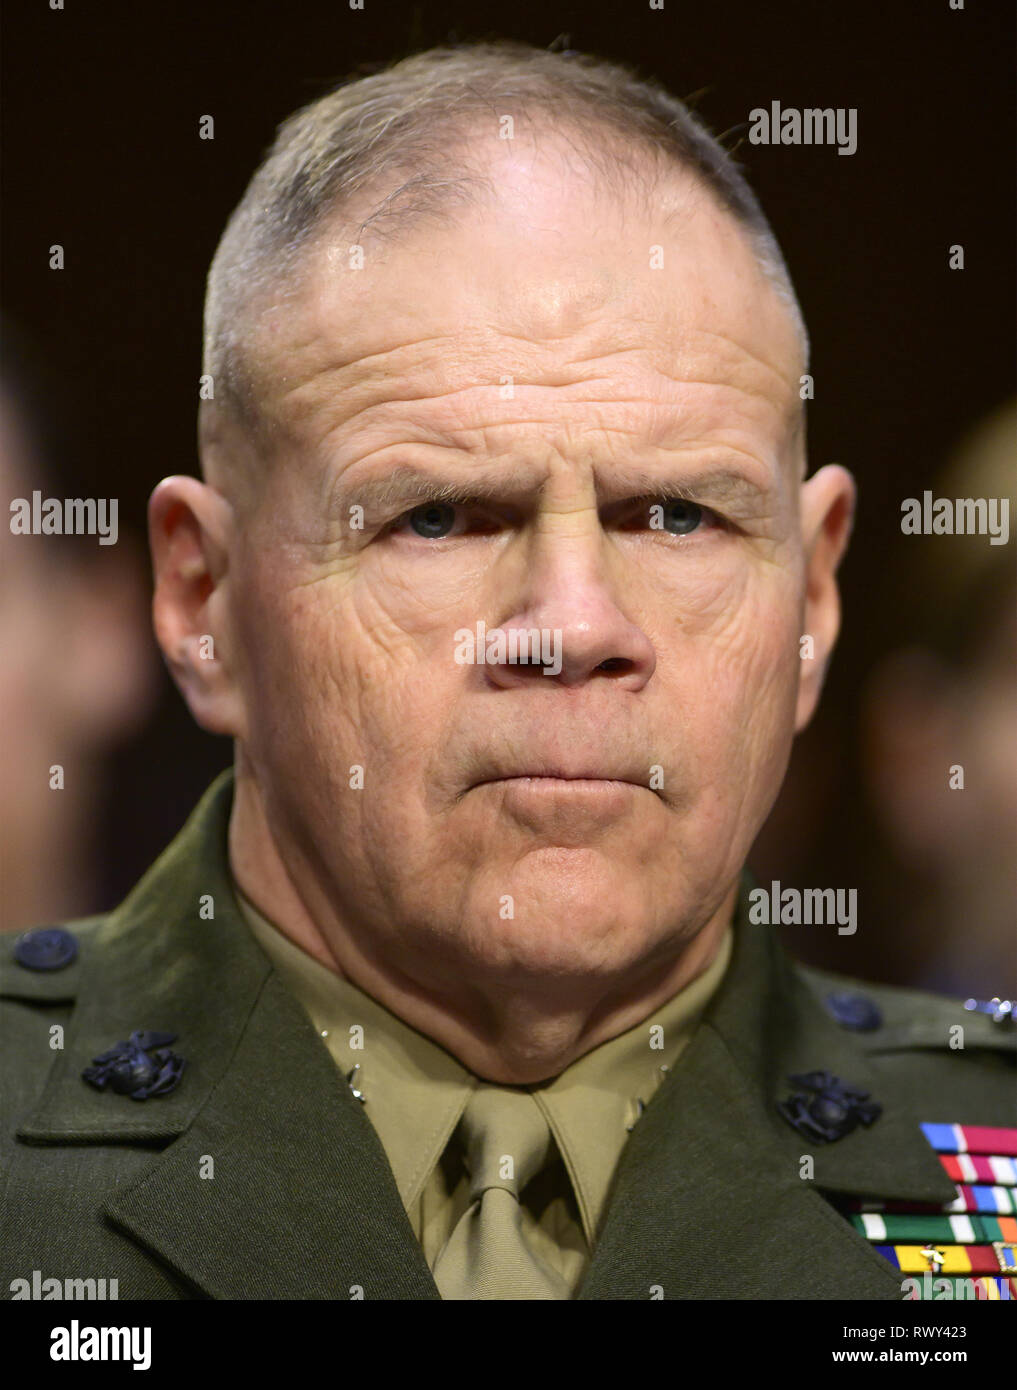 Washington, District of Columbia, USA. 7th Mar, 2019. United States Marine Corps General Robert B. Neller, Commandant of the Marine Corps testifies before the US Senate Committee on Armed Services during a hearing on ''Chain of Command's Accountability to Provide Safe Military Housing and Other Building Infrastructure to Service members and Their Families'' on Capitol Hill in Washington, DC on Thursday, March 7, 2019 Credit: Ron Sachs/CNP/ZUMA Wire/Alamy Live News Stock Photo